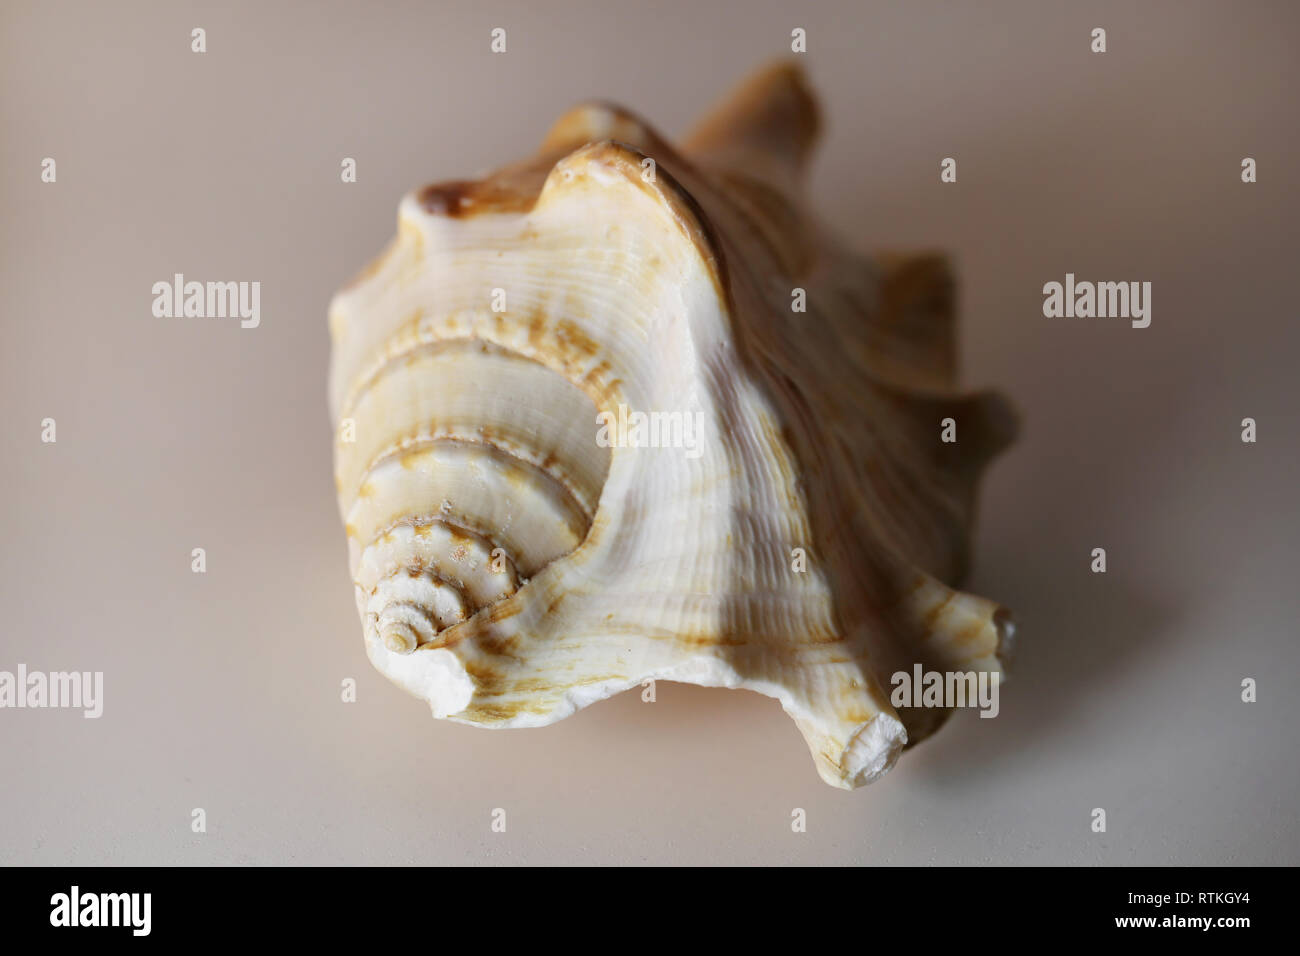 Still life photo of a beautiful white & brown sea mollusk shell on a white table. Lovely souvenir from a vacation by the sea. Macro image with colors. Stock Photo